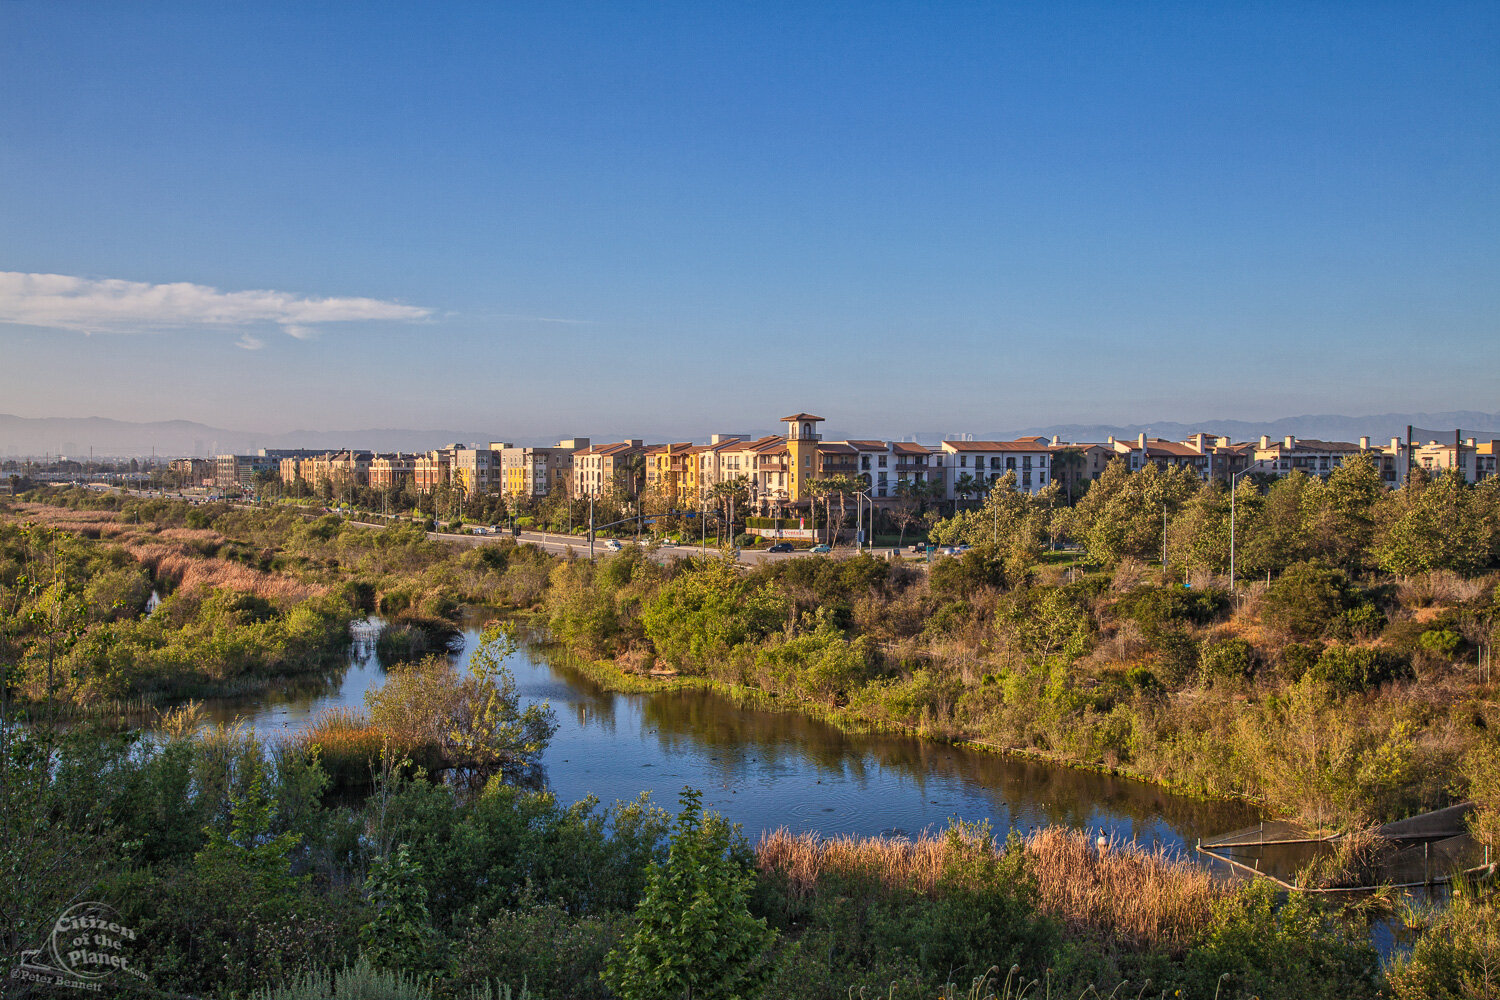  Playa Vista is planned community built on a portion of the Ballona Wetlands, development began in 2002 after a long dispute with local communities and environmental organizations concerning increased congestion, destruction of natural habitat and fe